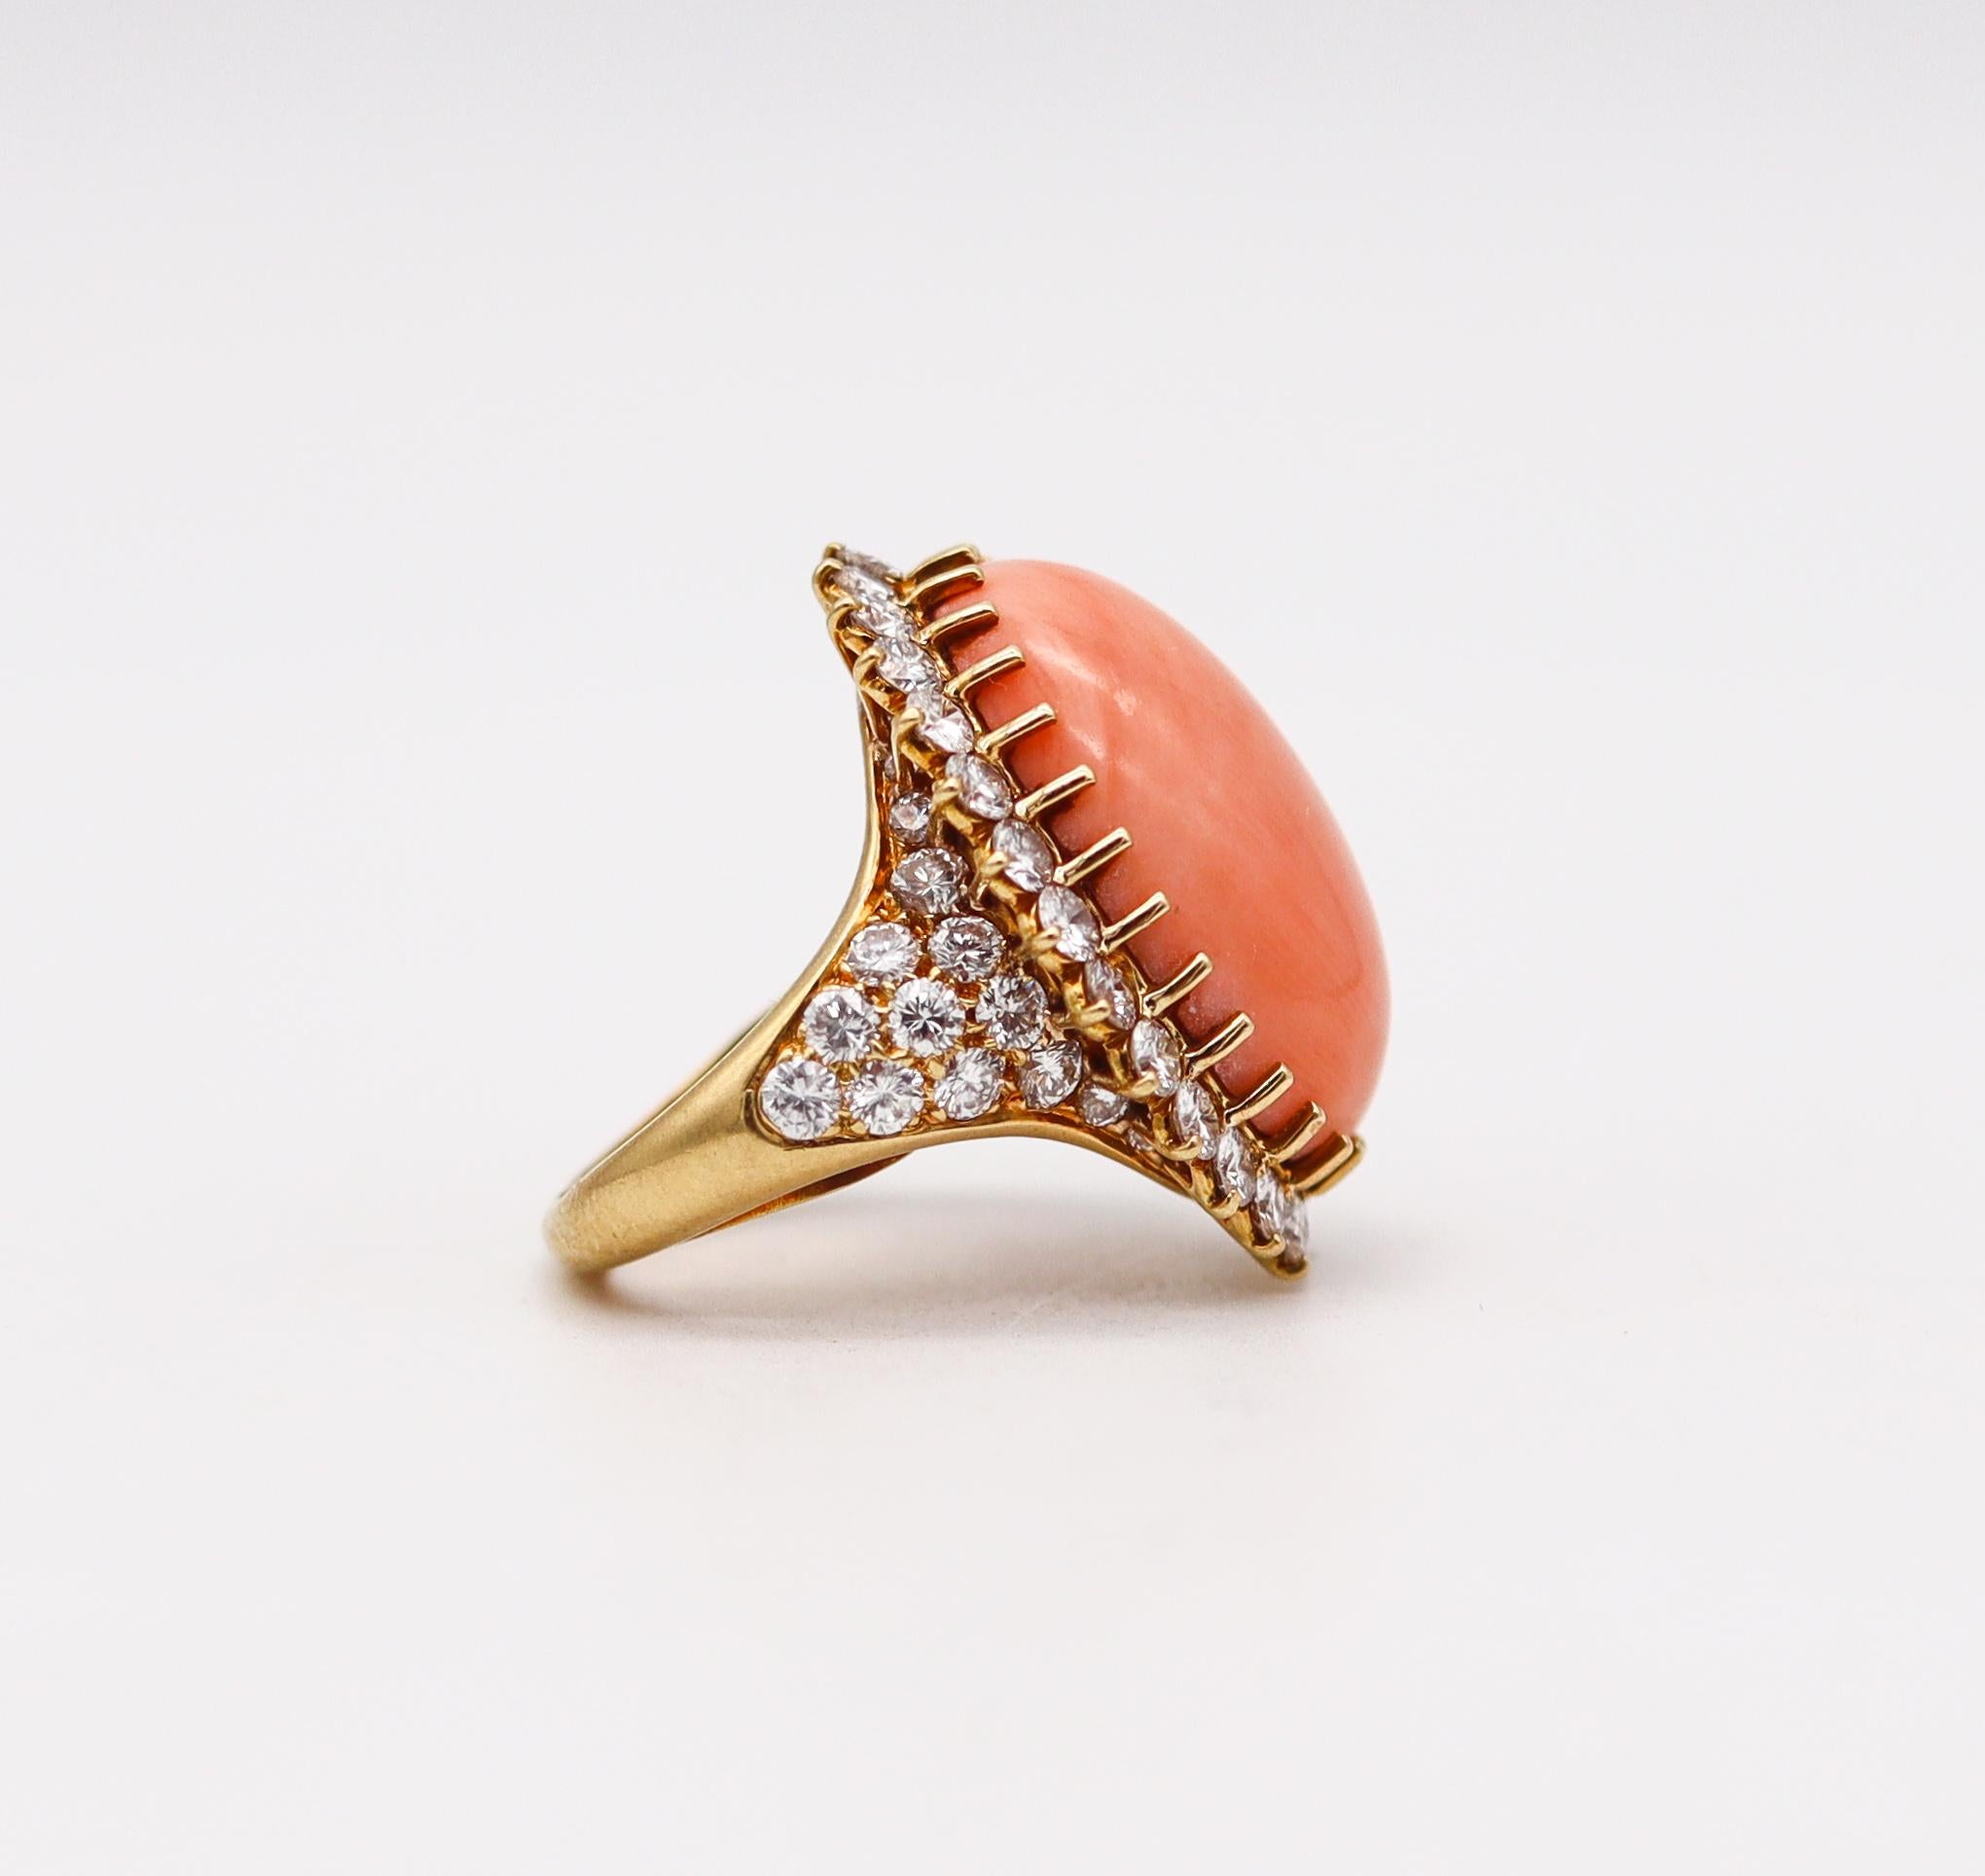 Cabochon Mauboussin 1970 Paris Coral Cocktail Ring 18Kt Gold 28.66 Ctw Diamonds And Coral